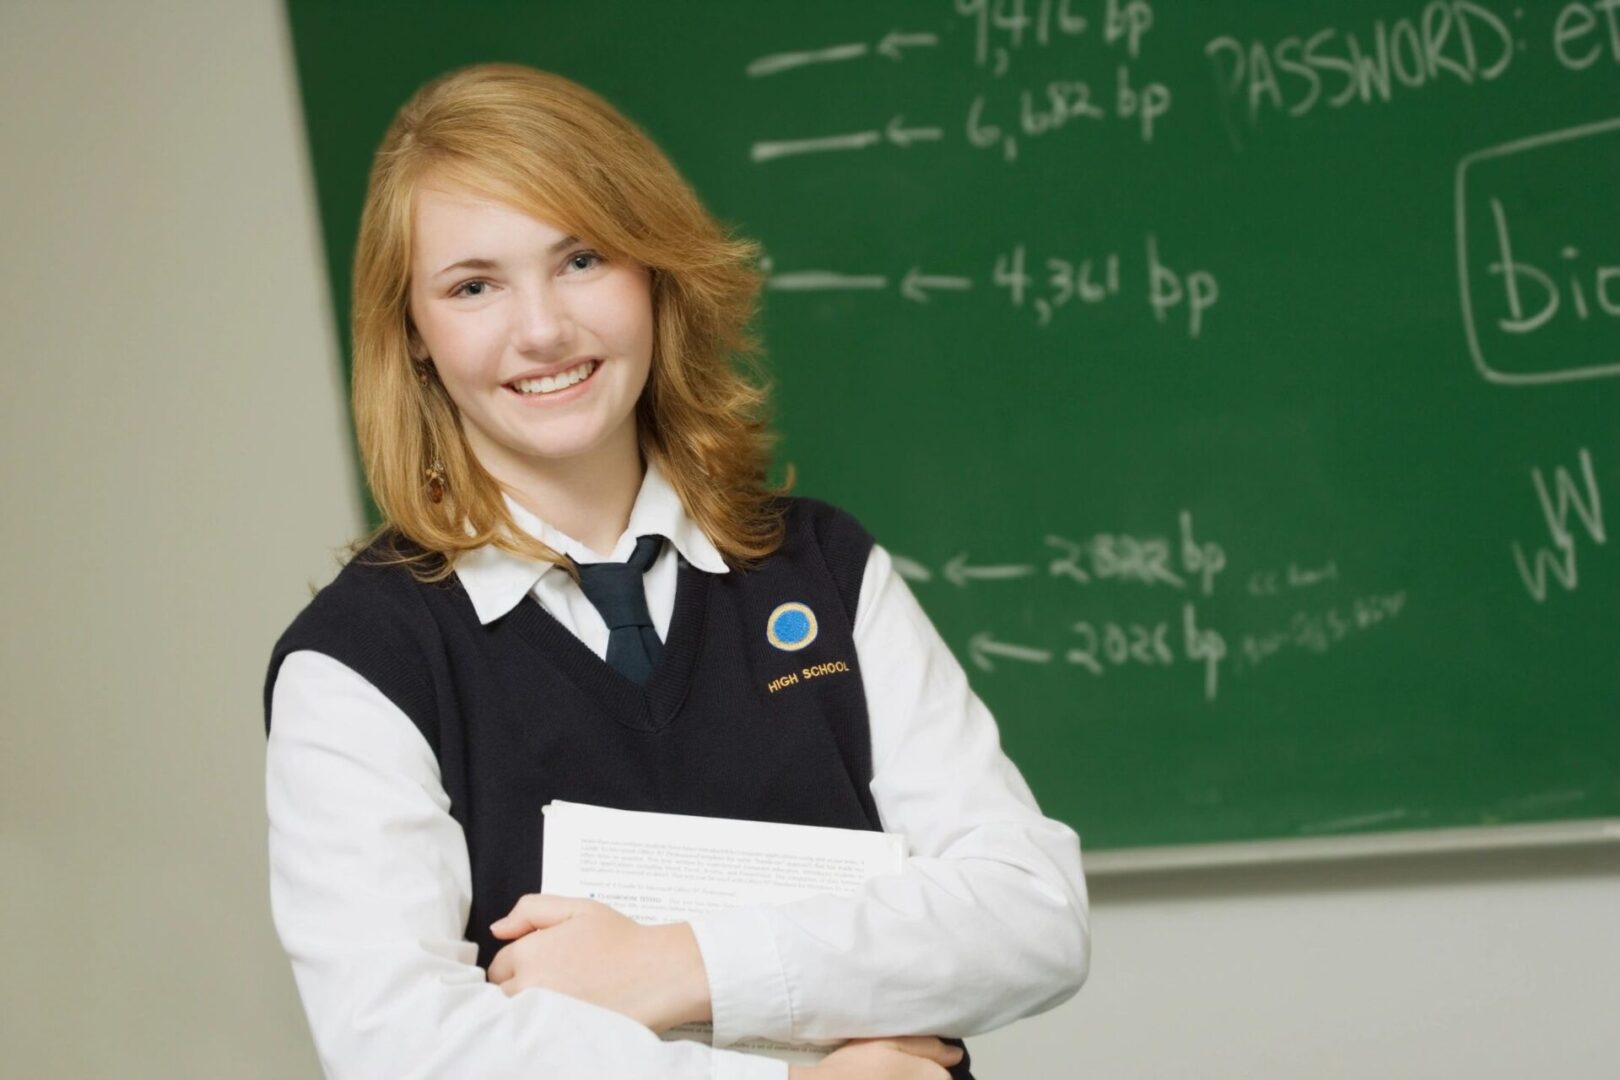 A girl in front of a chalkboard holding papers.